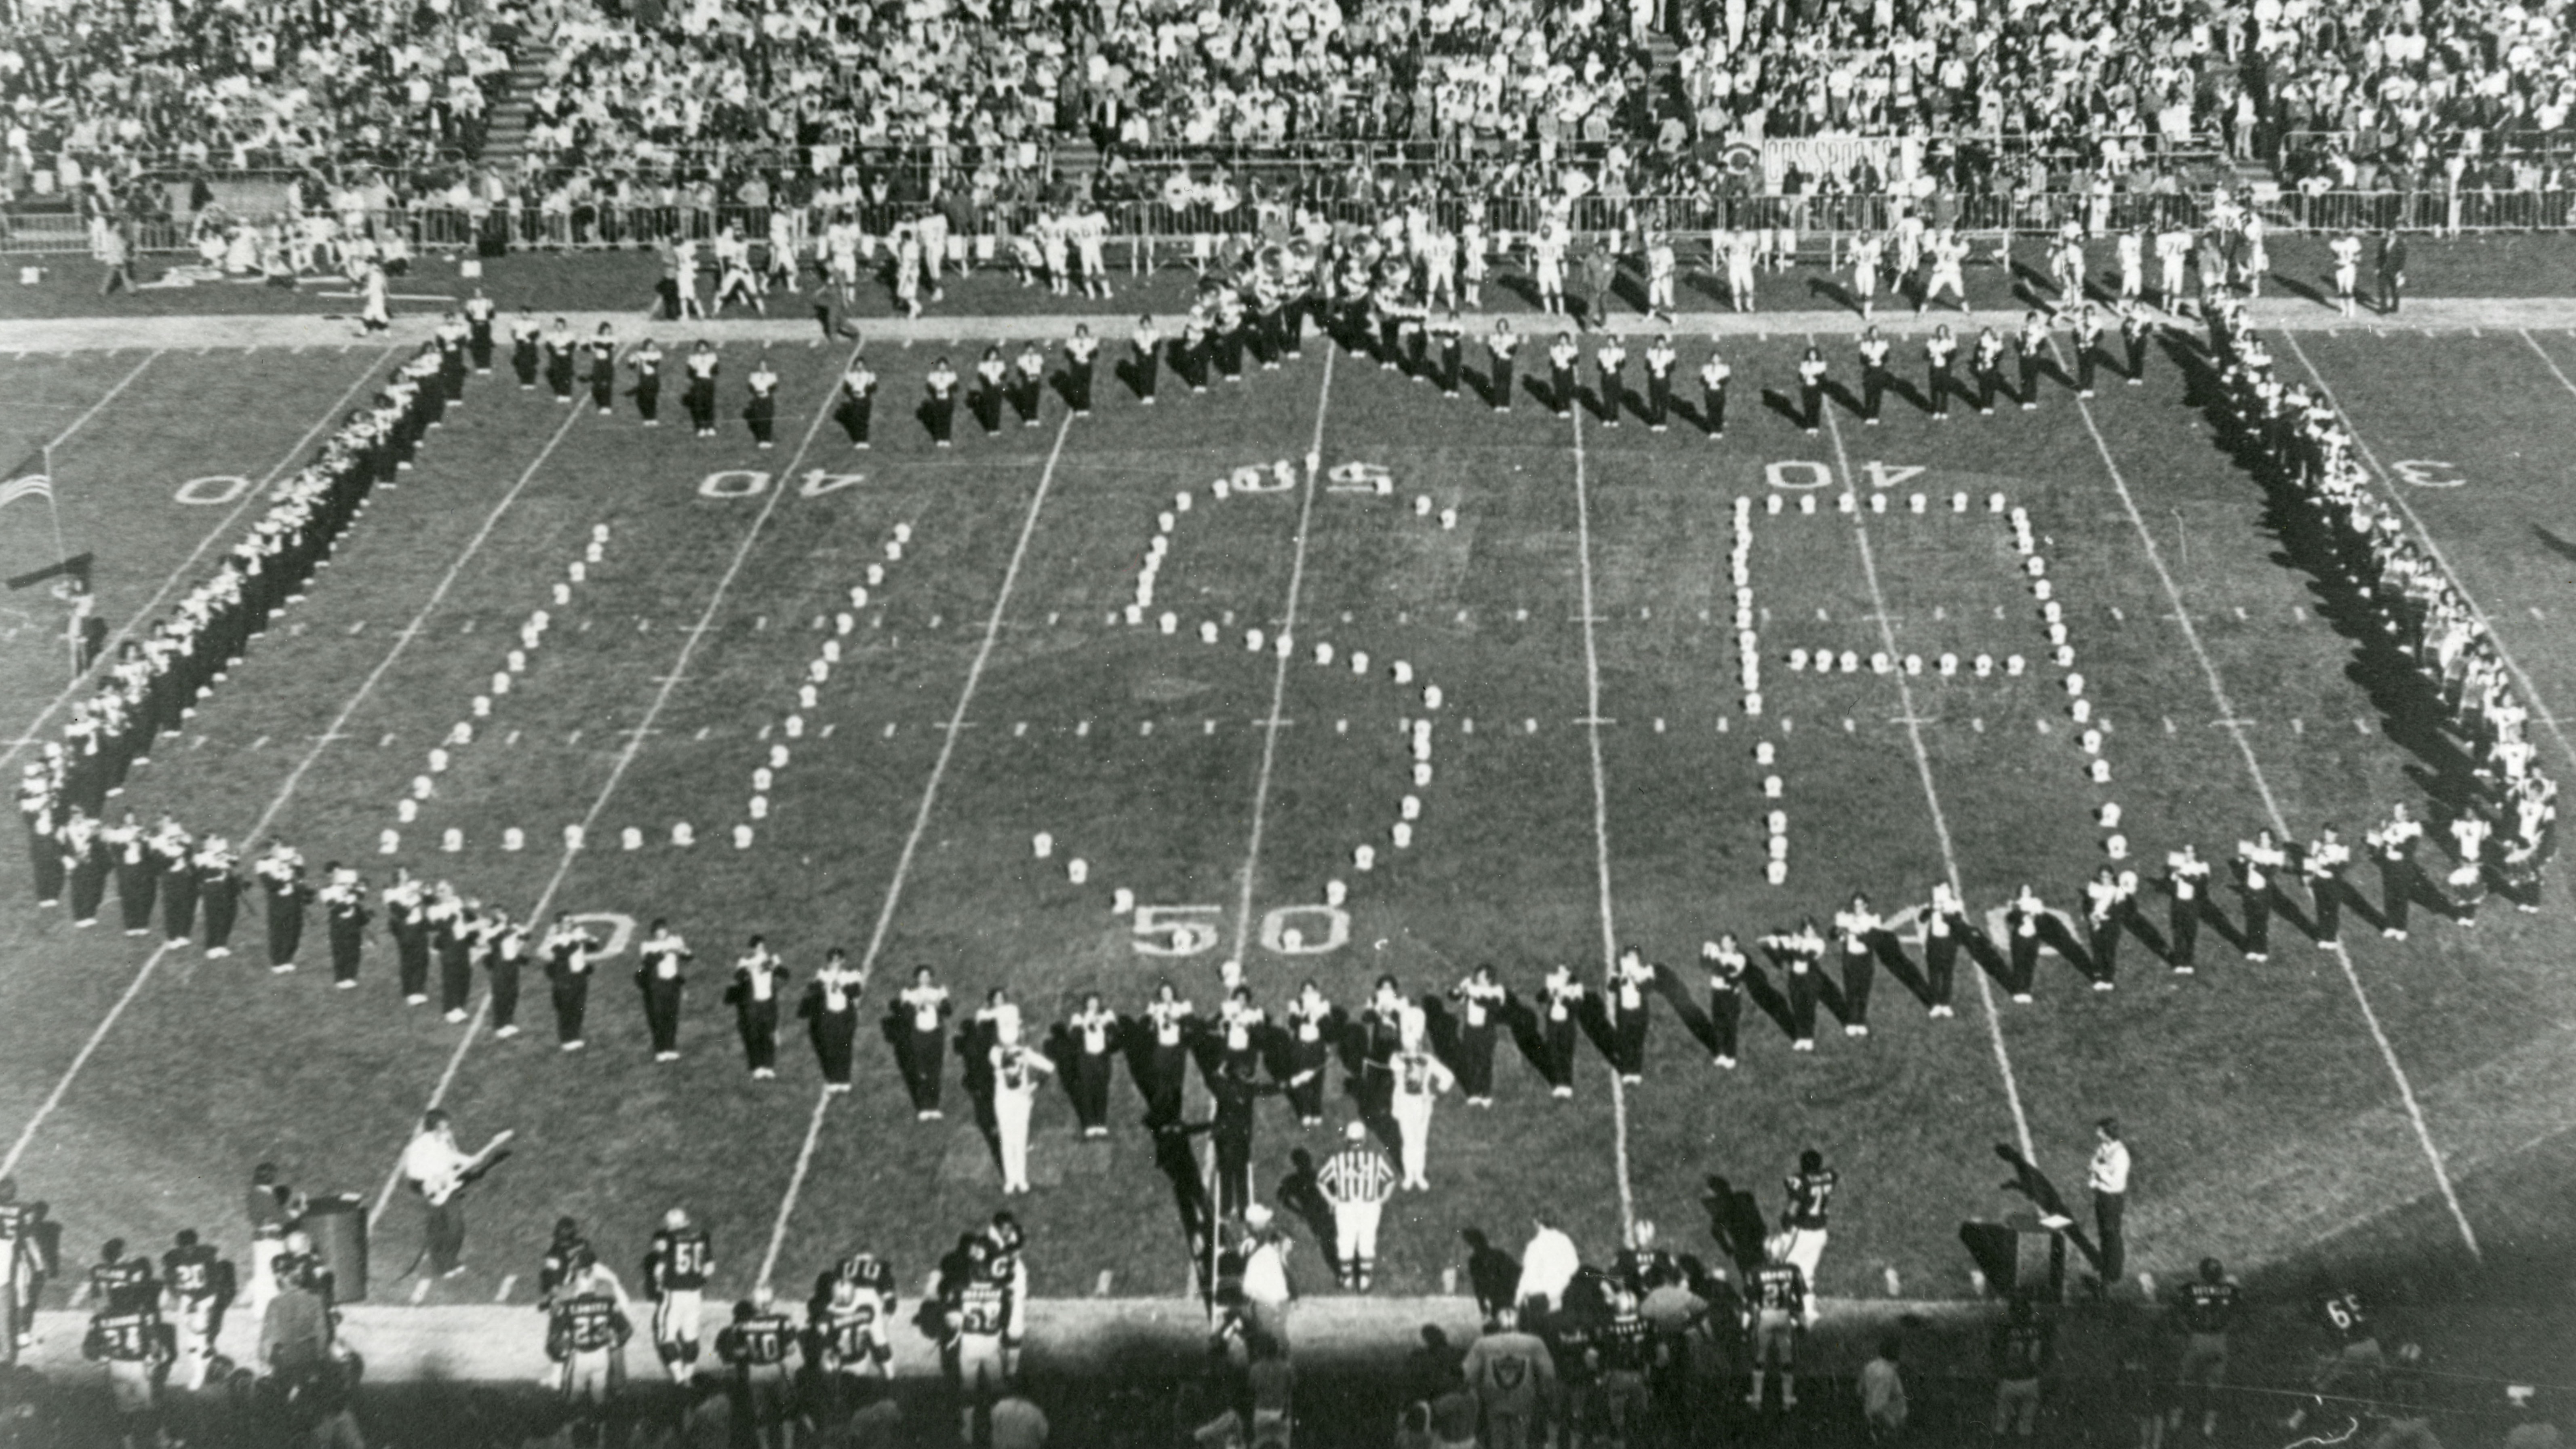 Cal Poly's marching band spells out 'USA' on the field of an NFL game in the 1970s